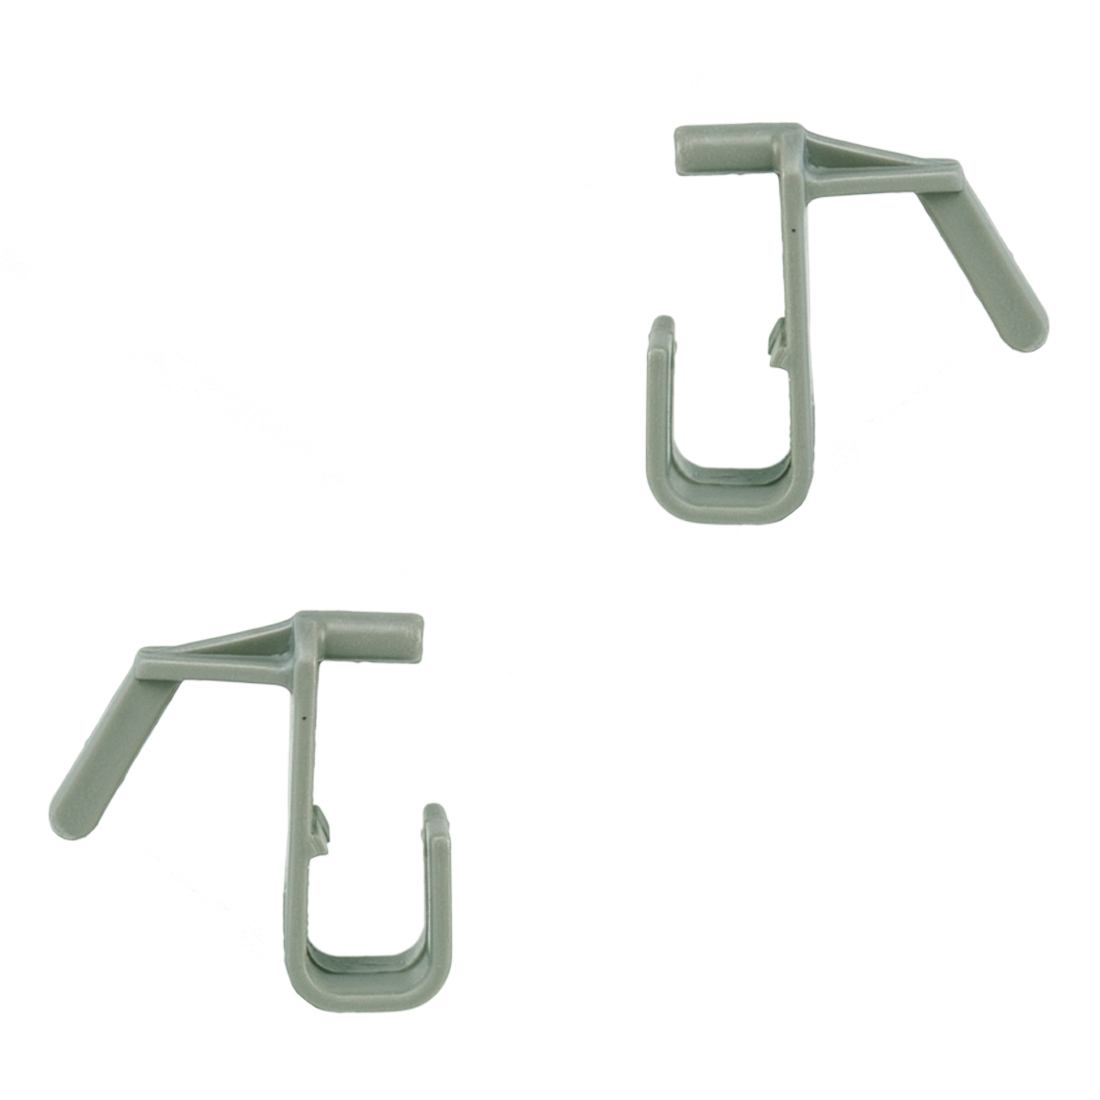 Pulex Small Bucket Clips - Set of Two - Side by Side View